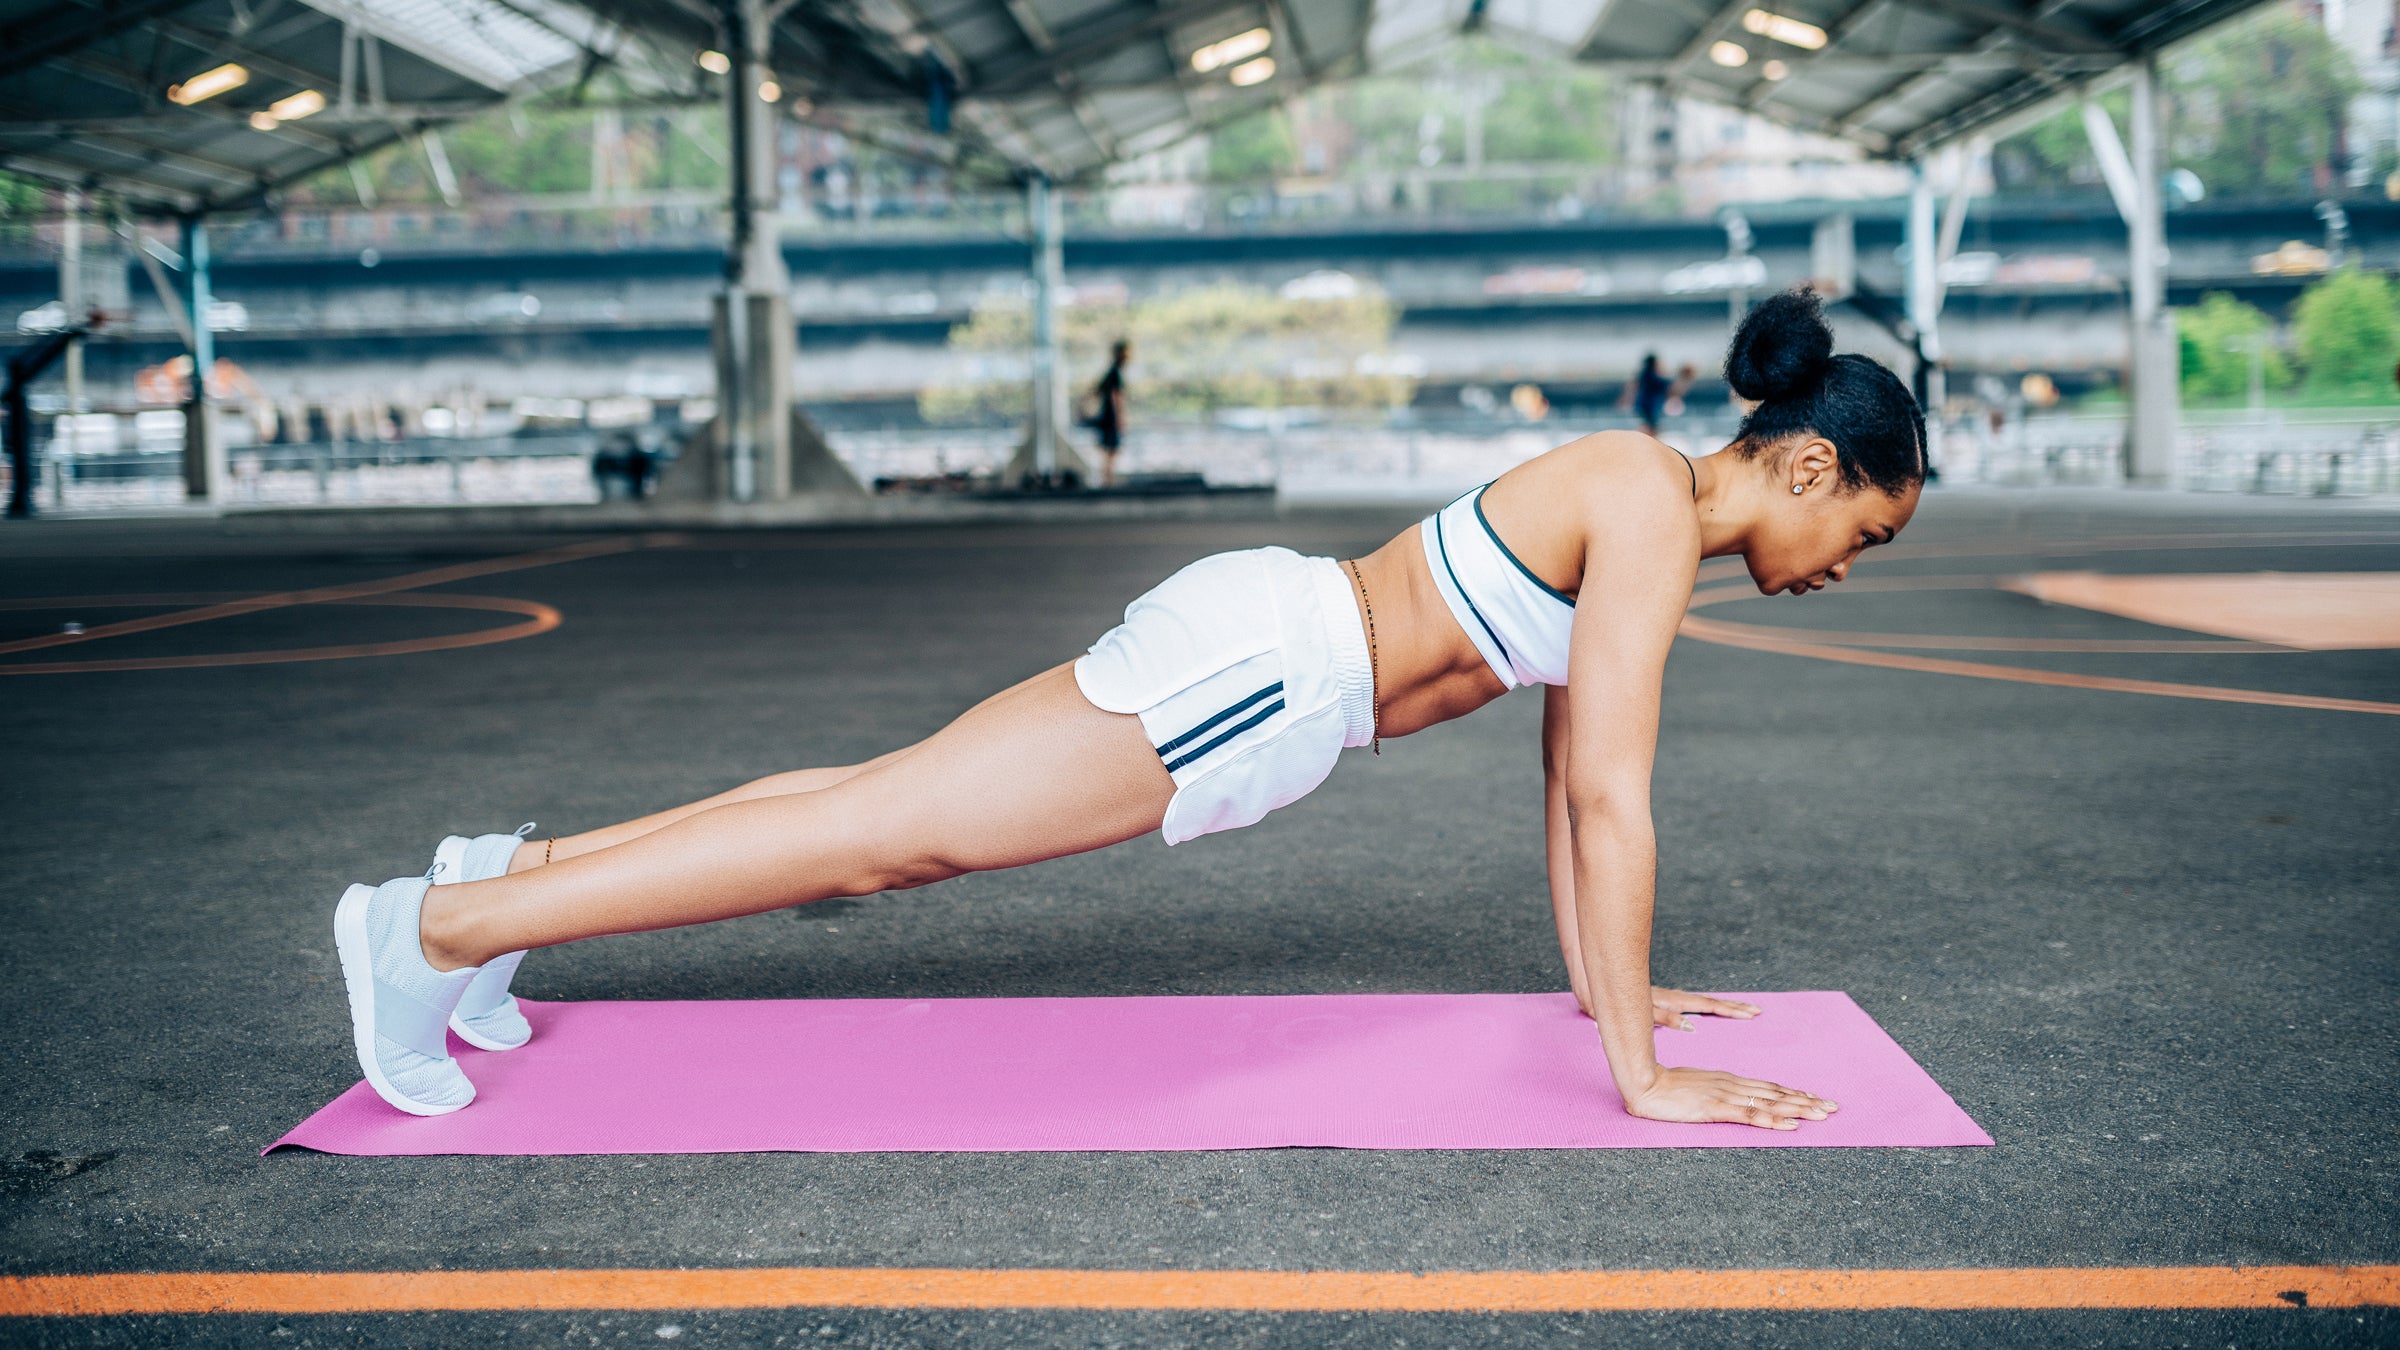 Side Plank Hip Lifts To Activate Your Obliques And Boost Your Core